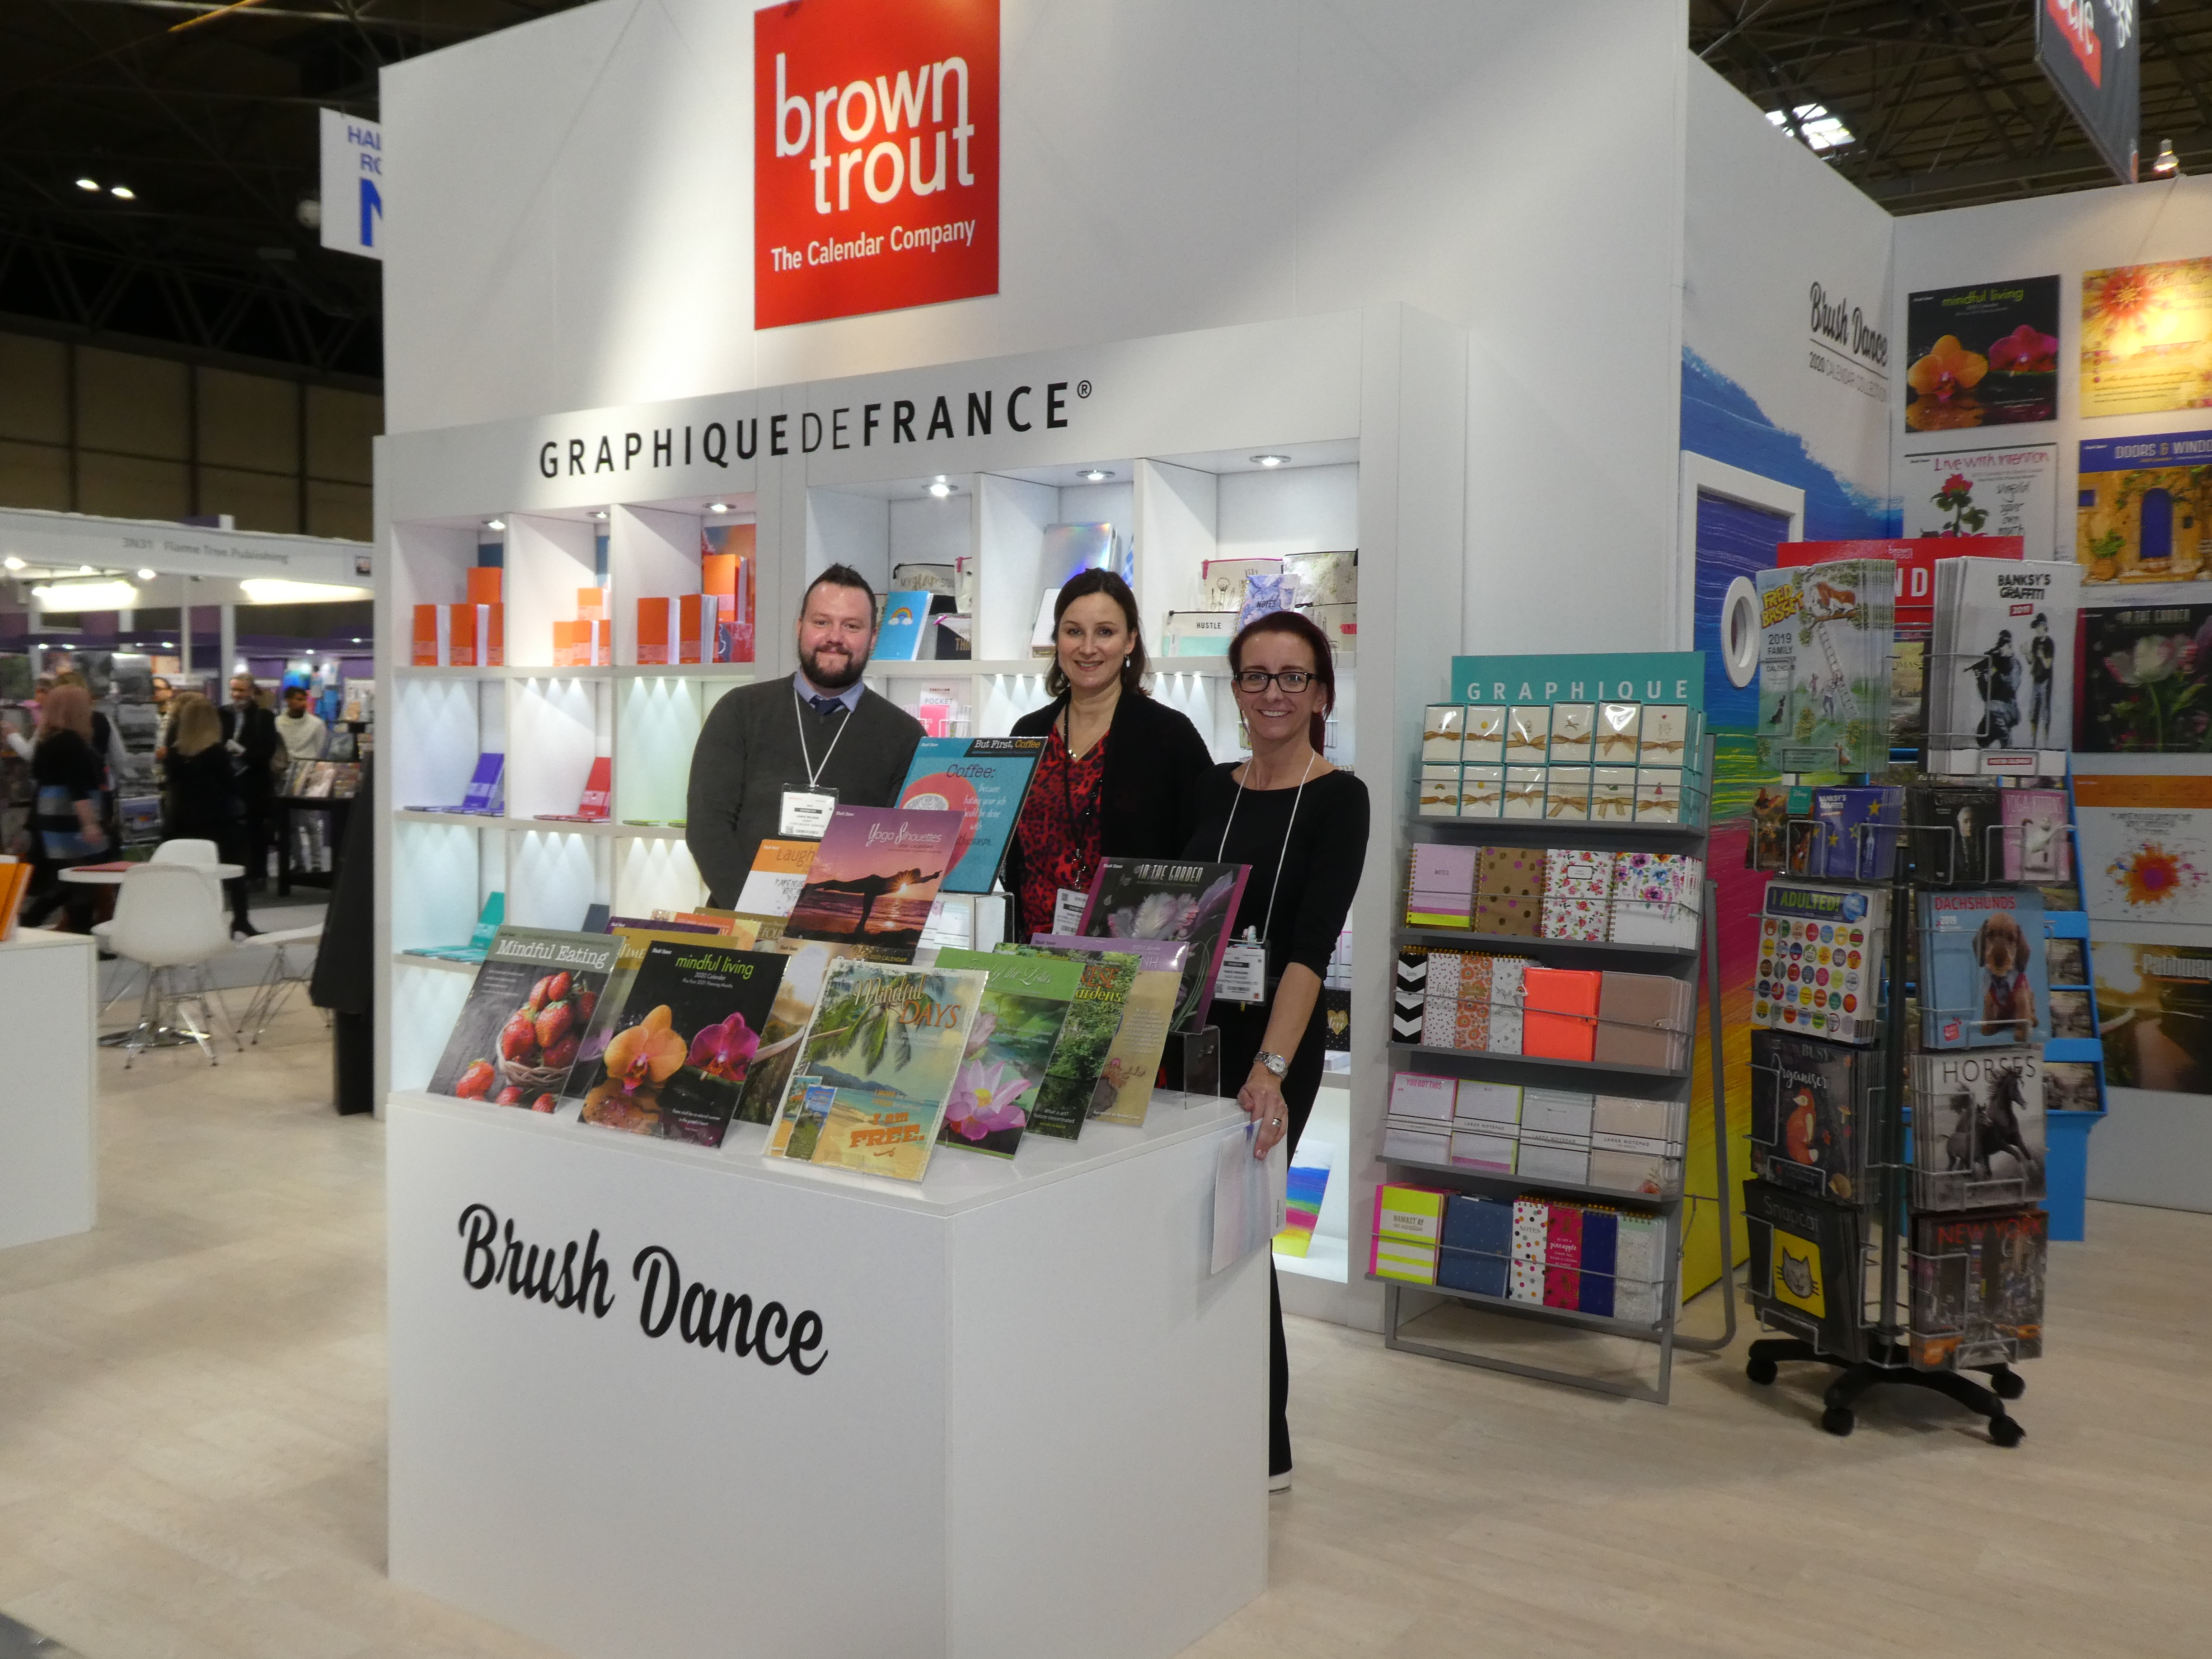 Above: The BrownTrout stand was showcasing the company’s latest acquisition, the US-based Brush Dance calendar company. 